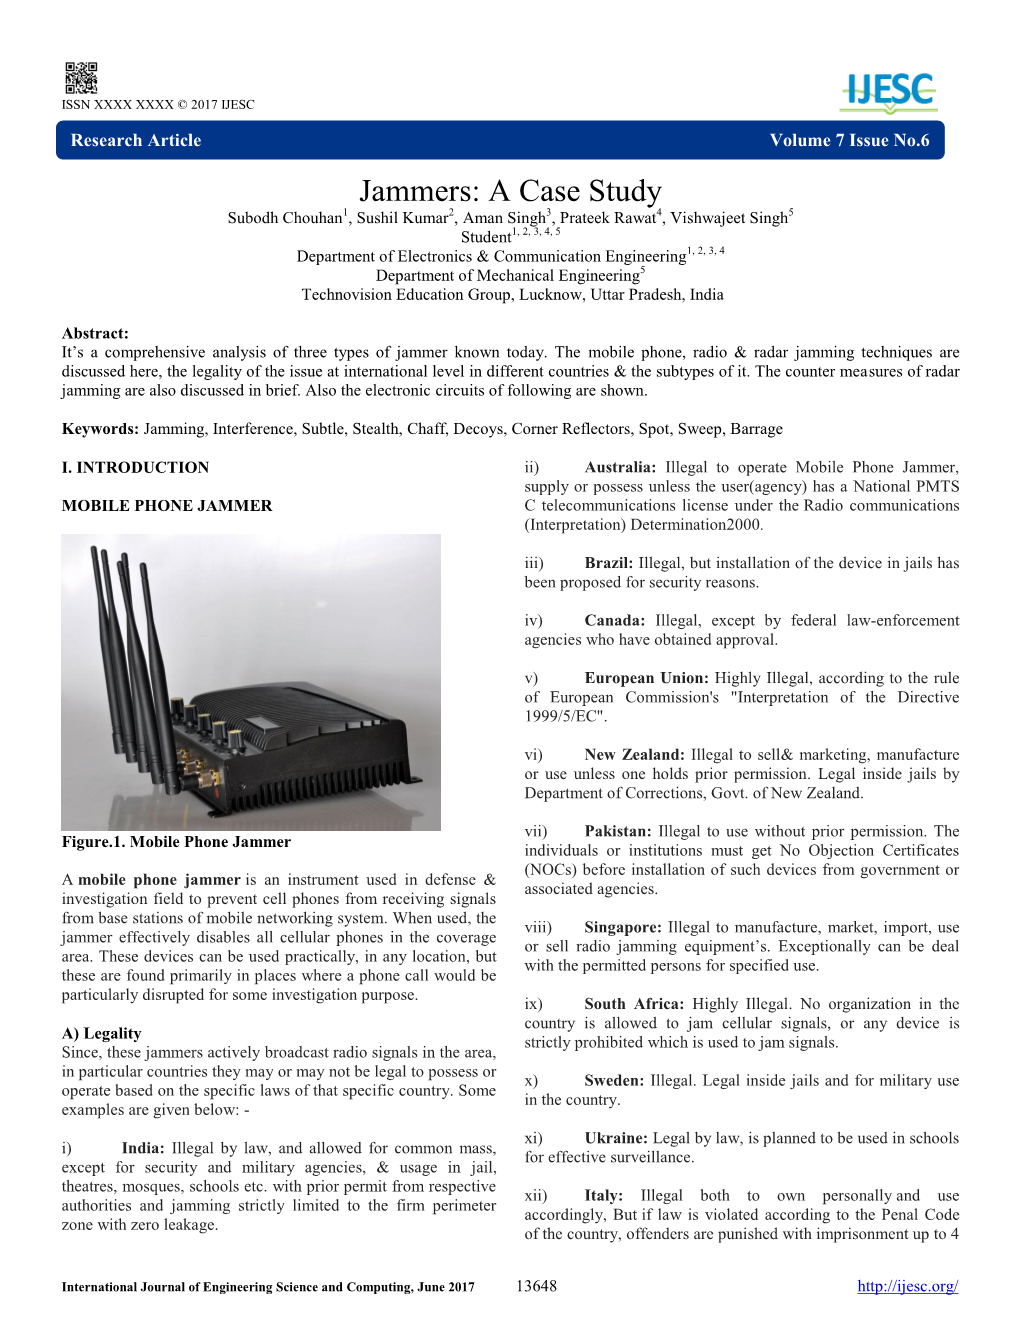 Jammers: a Case Study